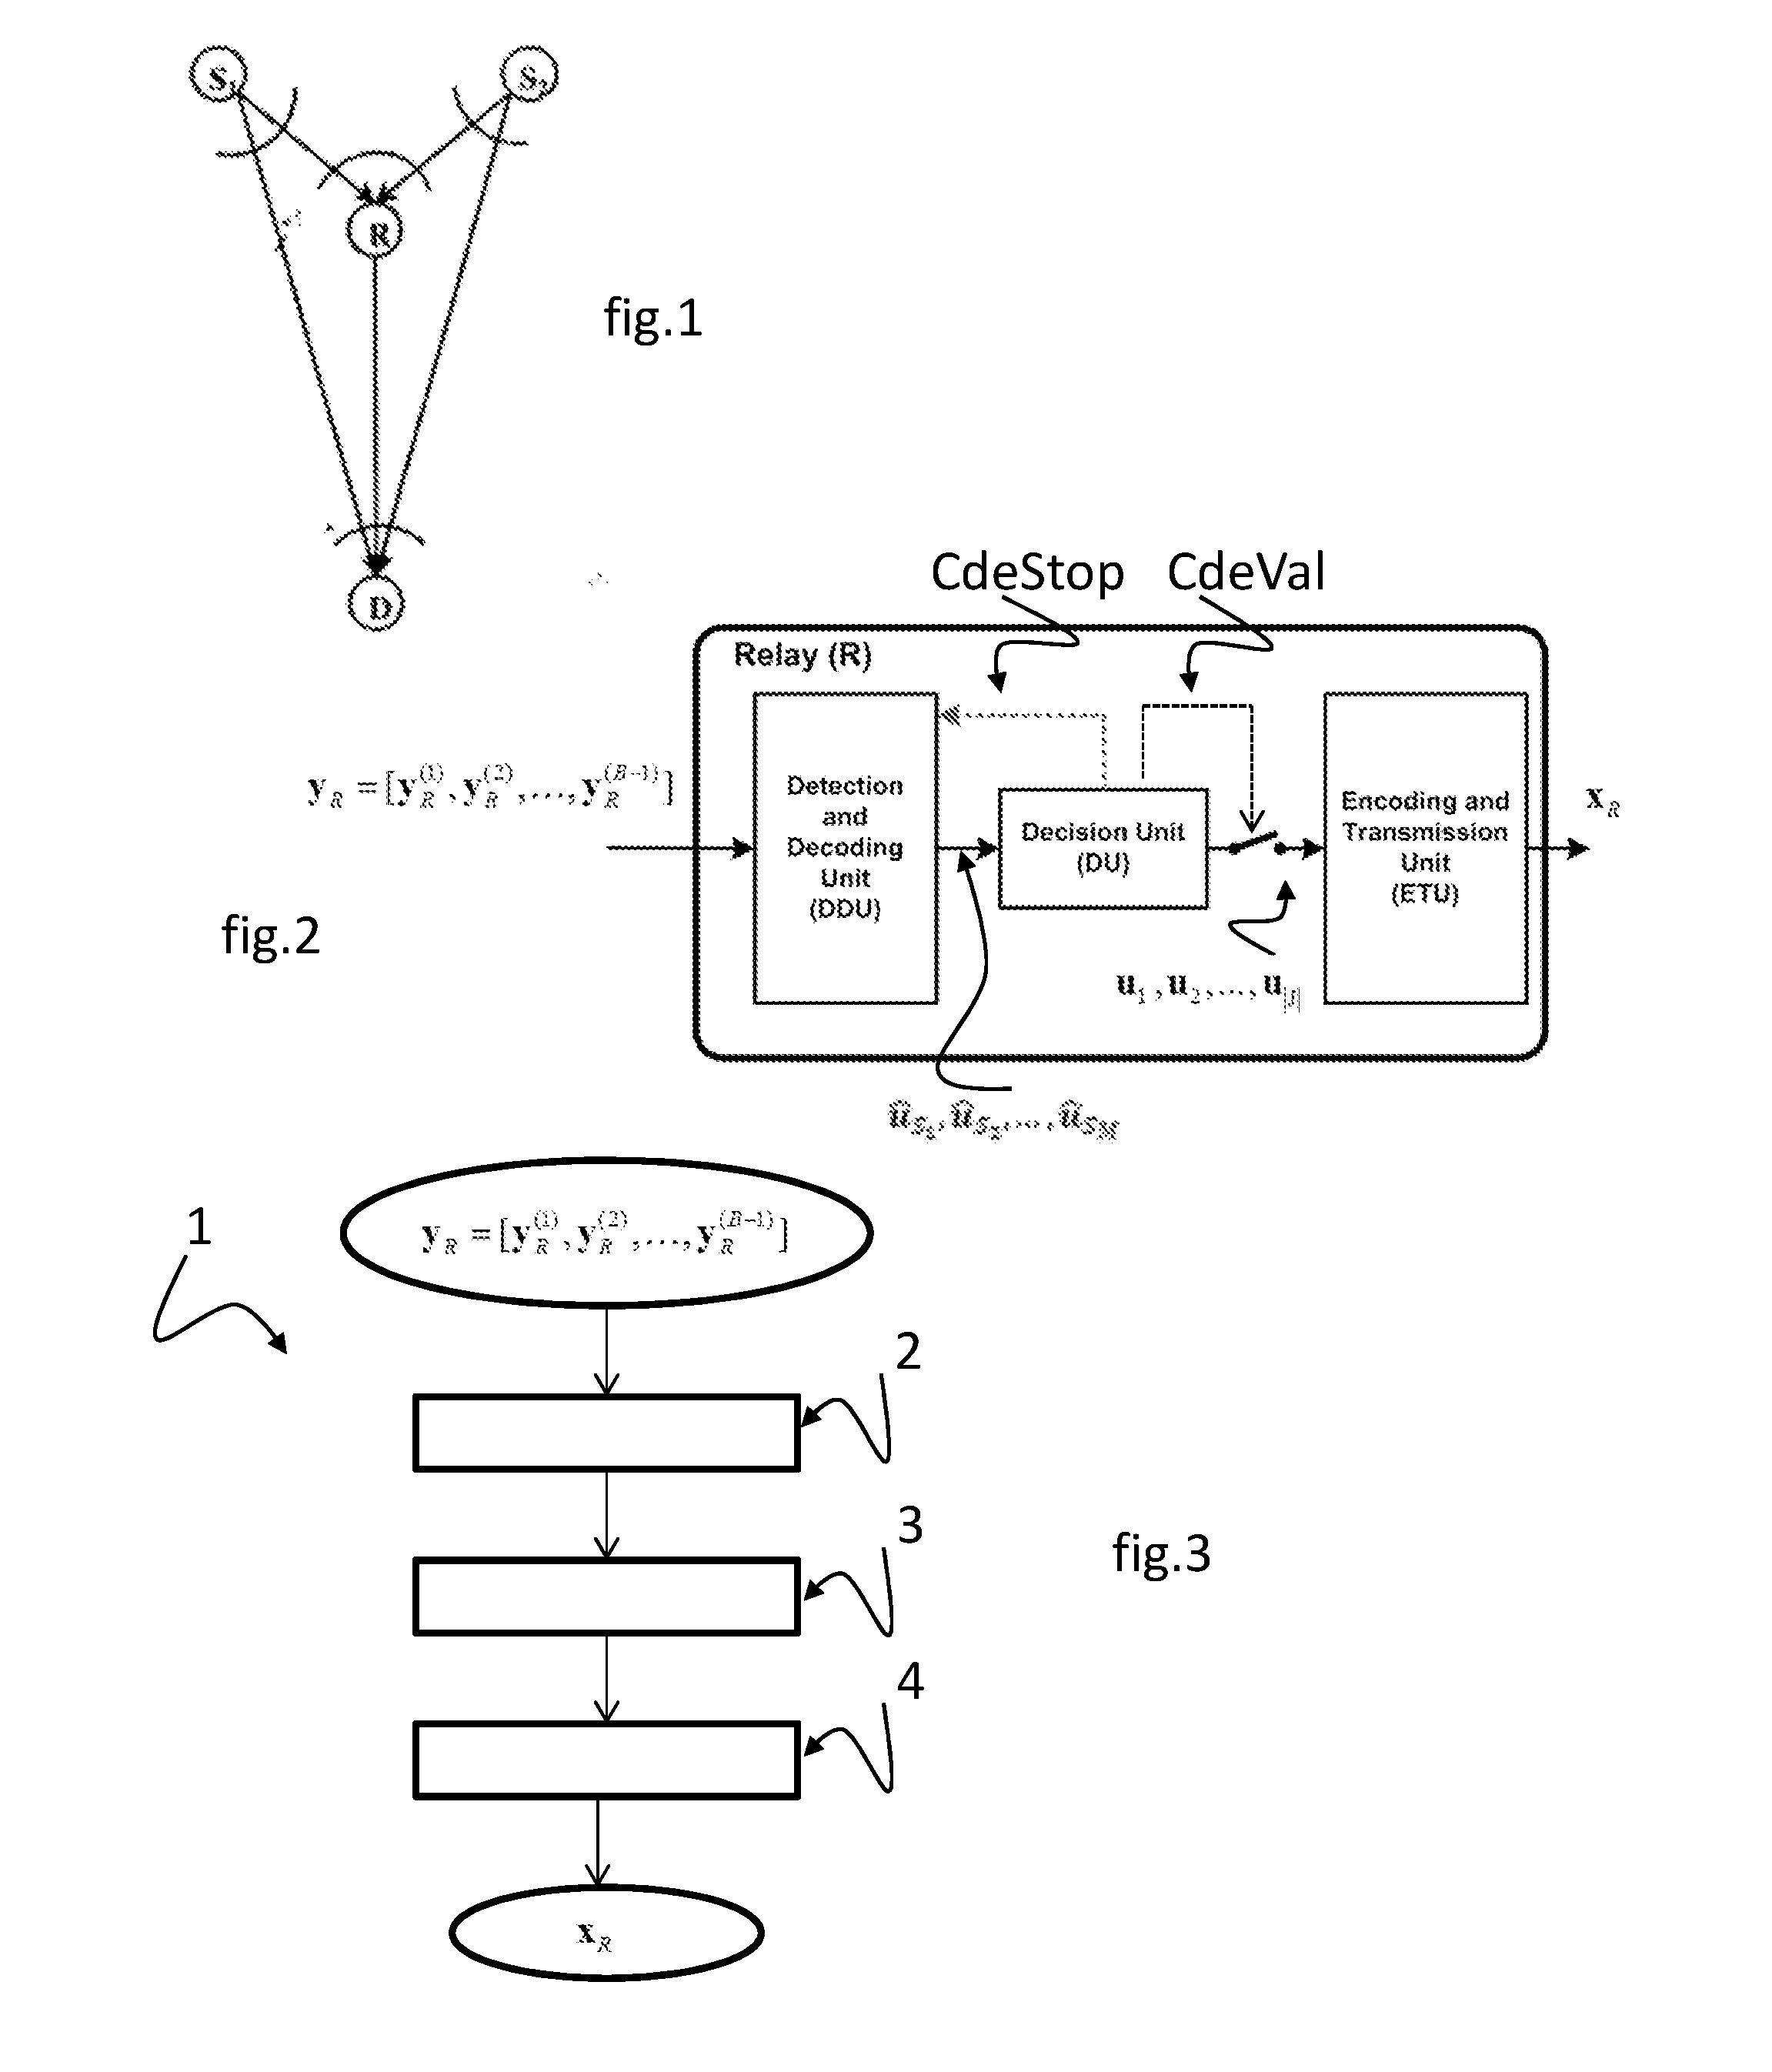 Method for transmitting a digital signal for a marc system having a dynamic half-duplex relay, corresponding program product and relay device